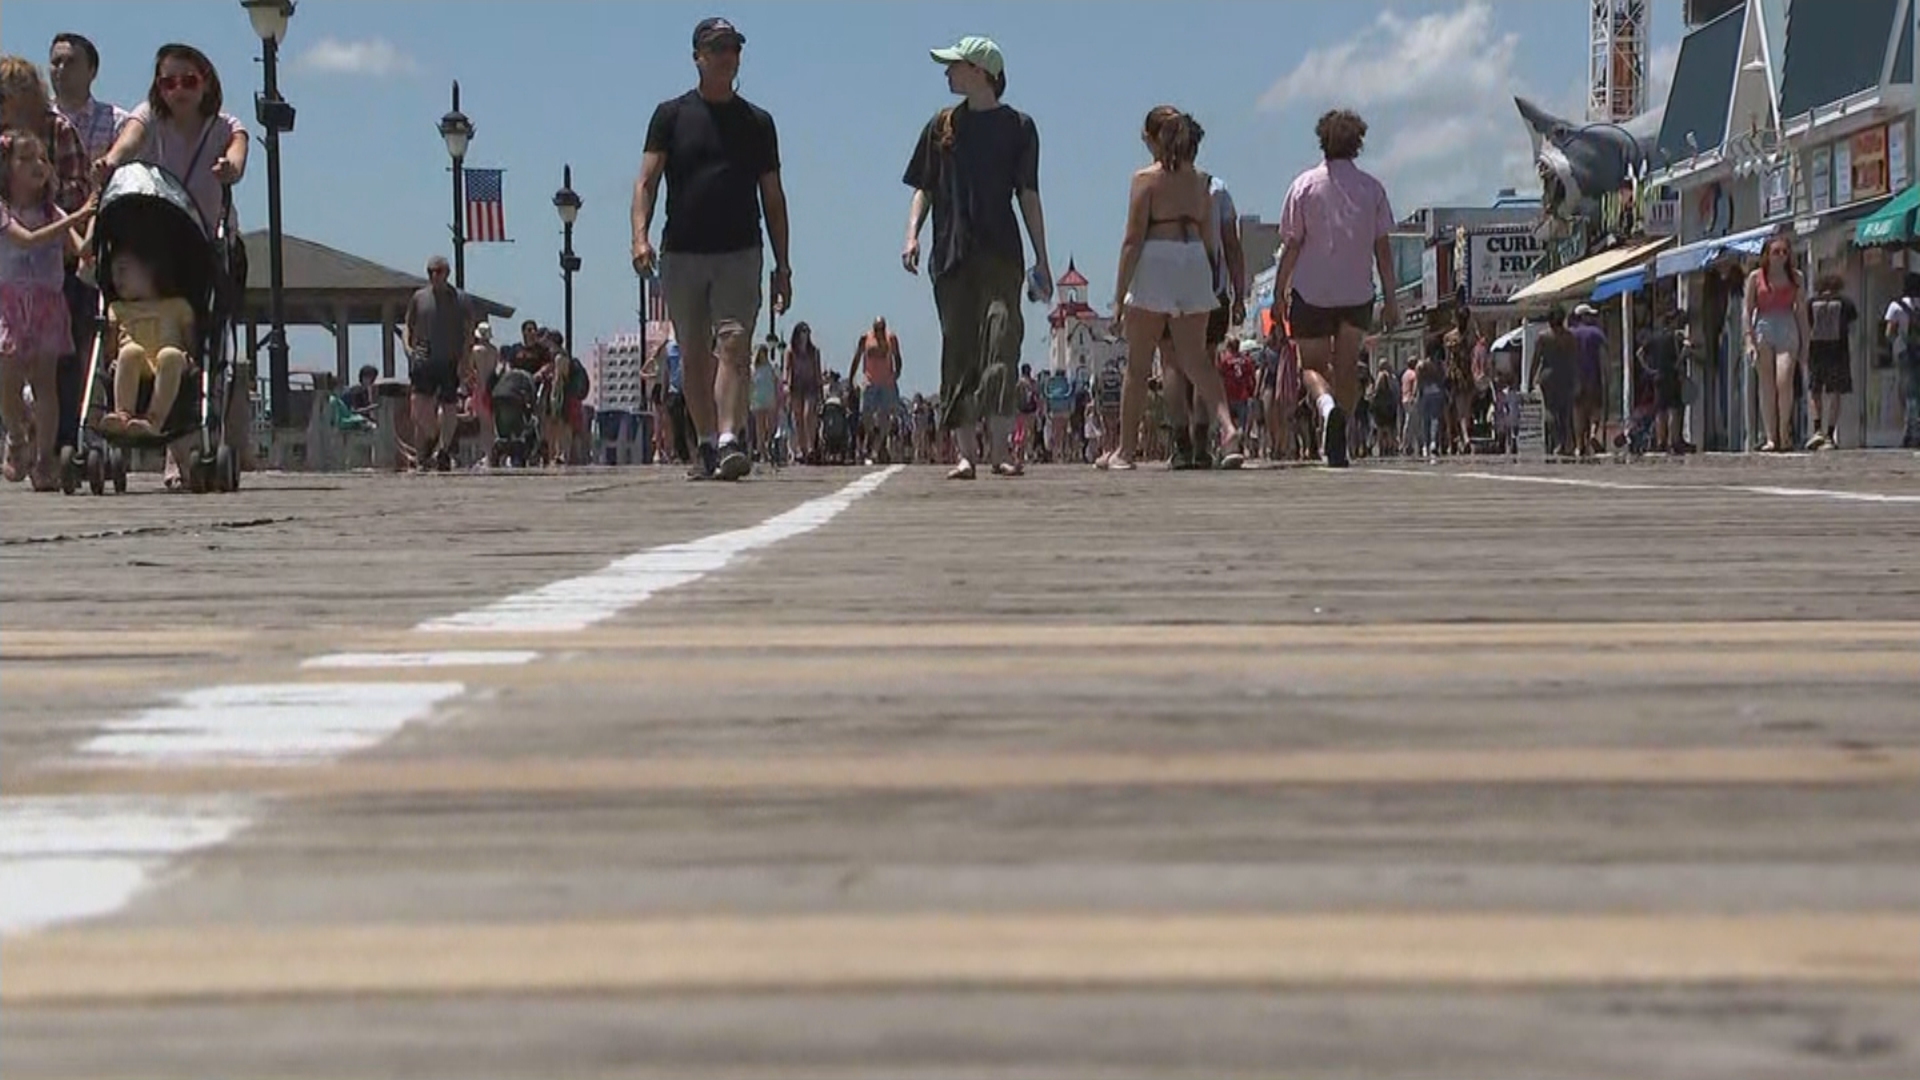 Business Is Booming At Ocean City's Boardwalk On Memorial Day Weekend: 'It's So Gorgeous Out'